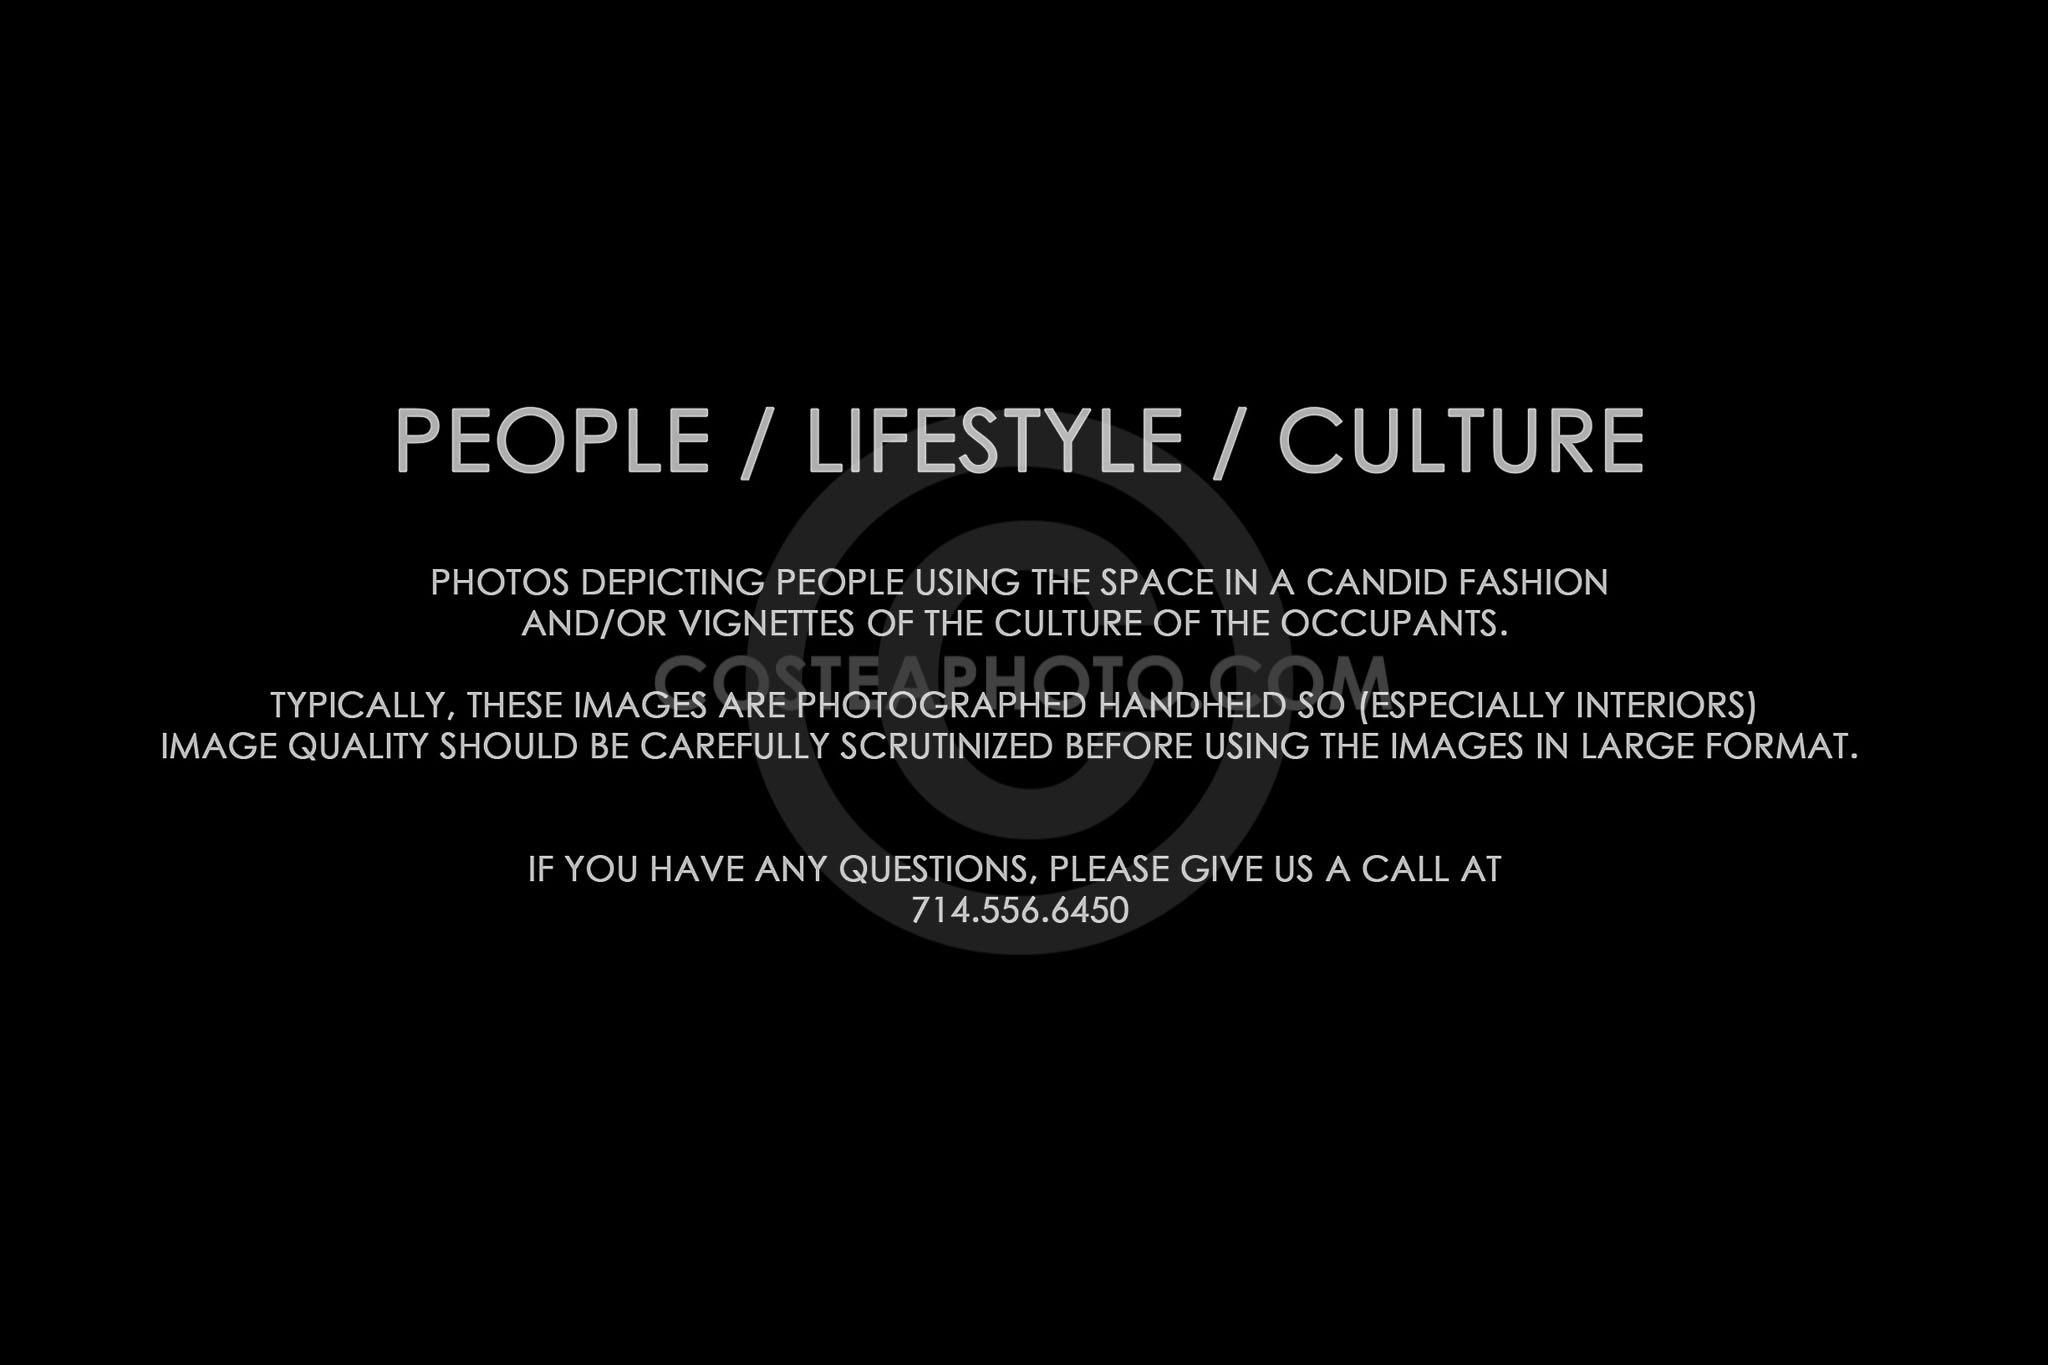 (387) TITLE PAGE - PEOPLE LIFESTYLE